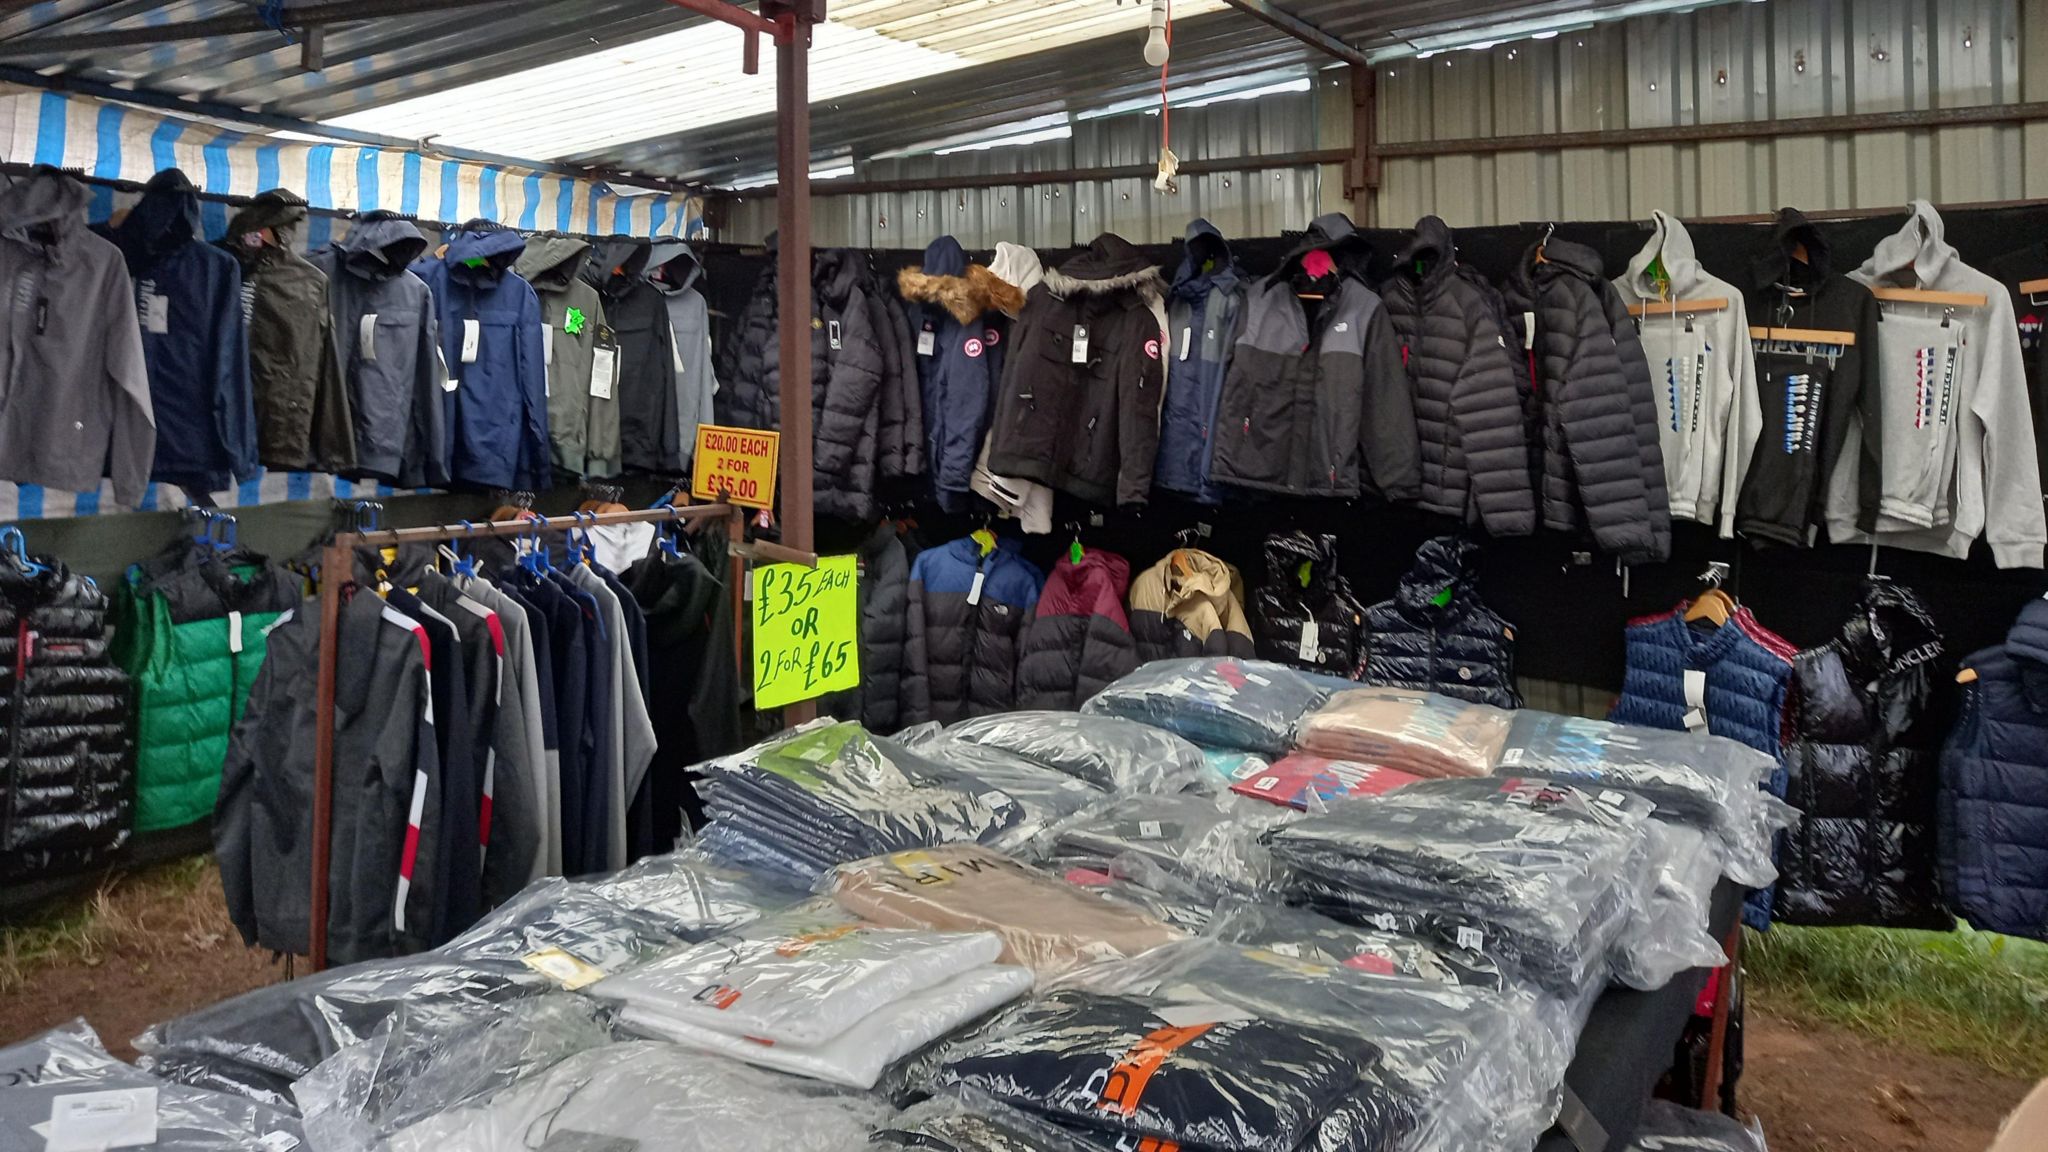 Products seized at Furnace End Market